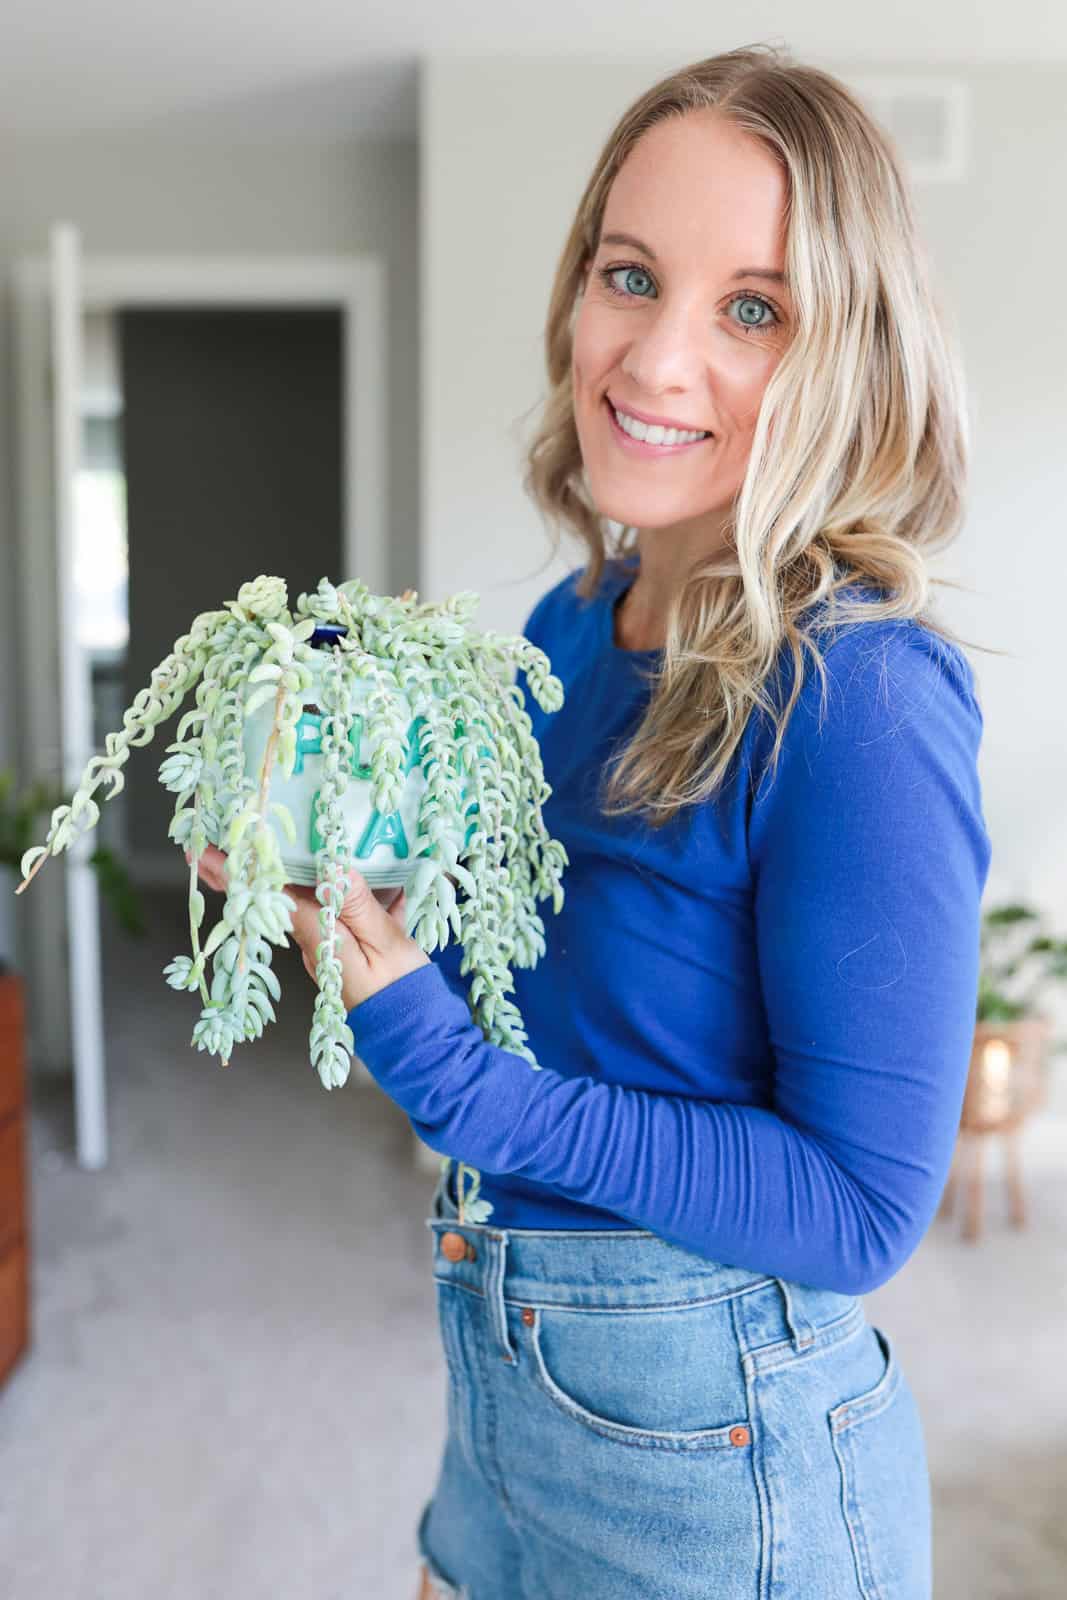 jen biswas with burro's tail plant